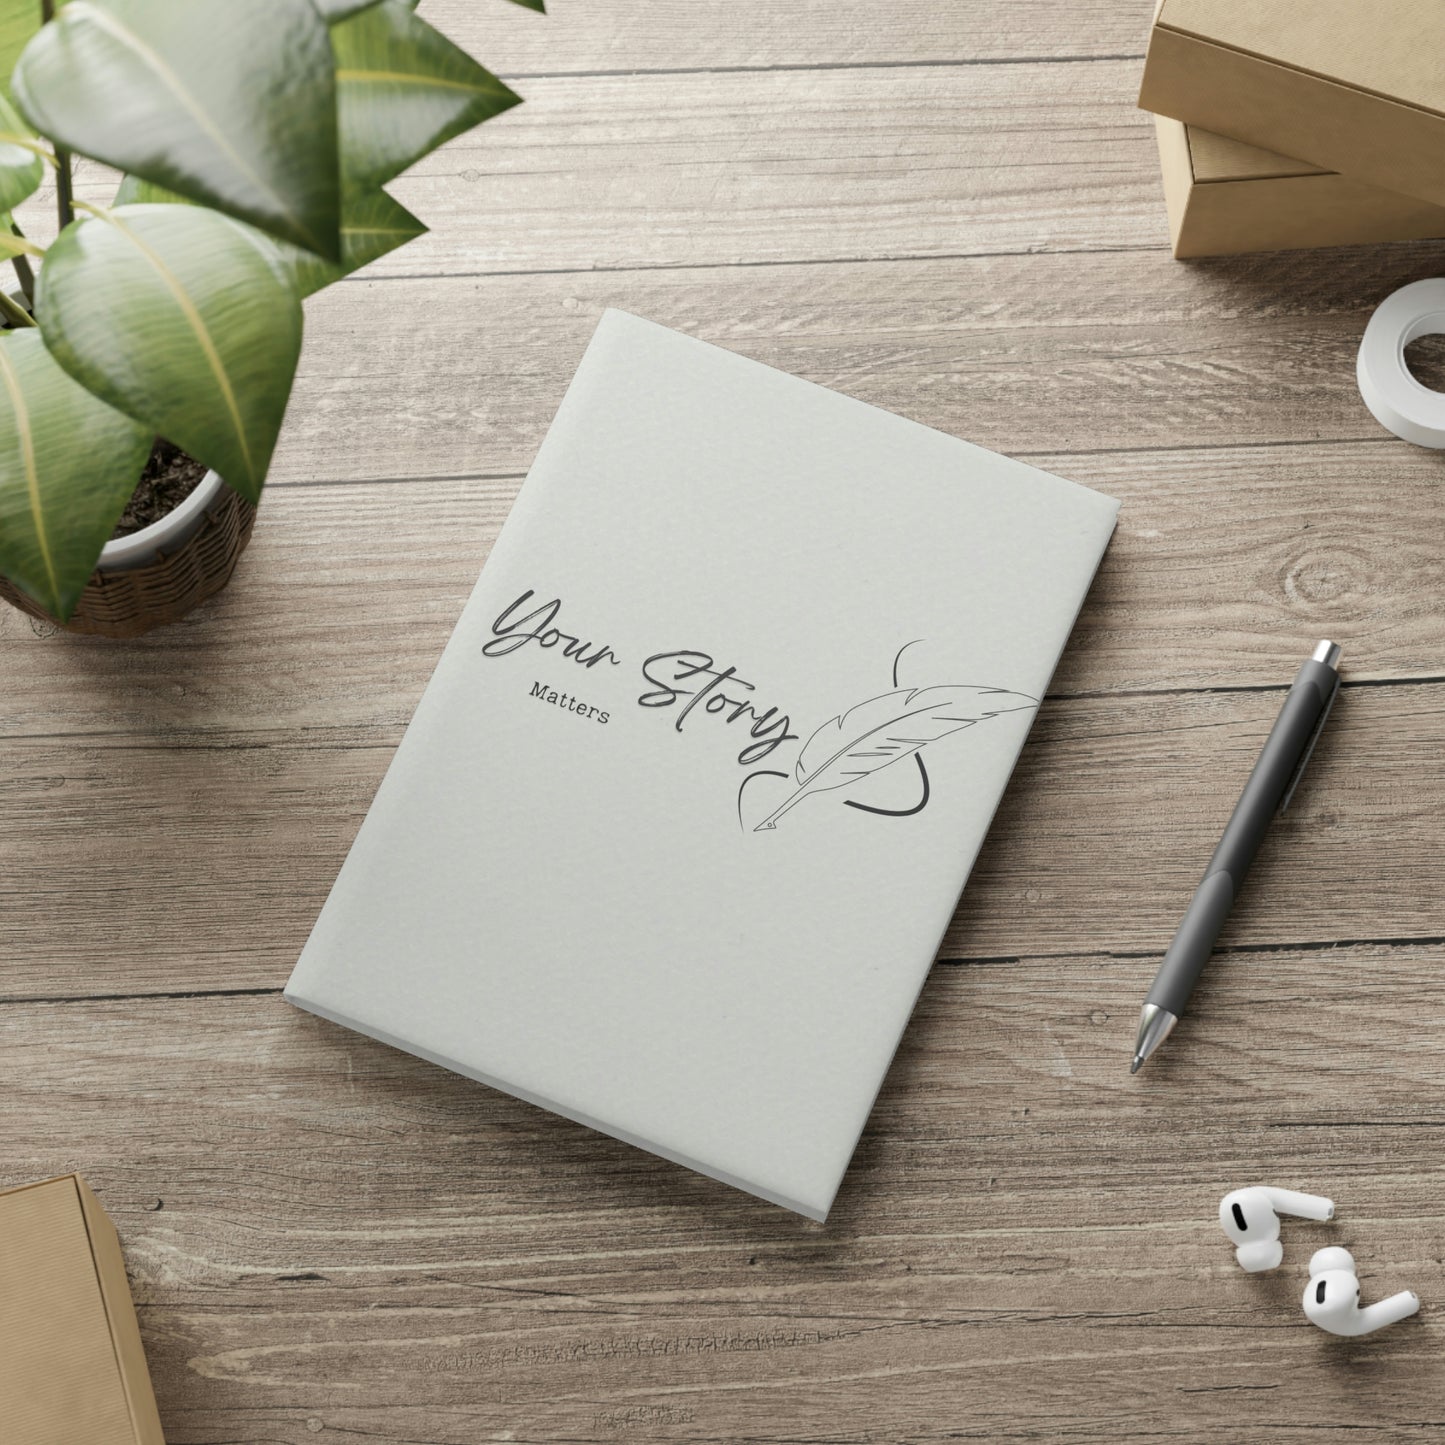 Your Story Matters // Write Out Loud // Hardcover Notebook with Puffy Covers